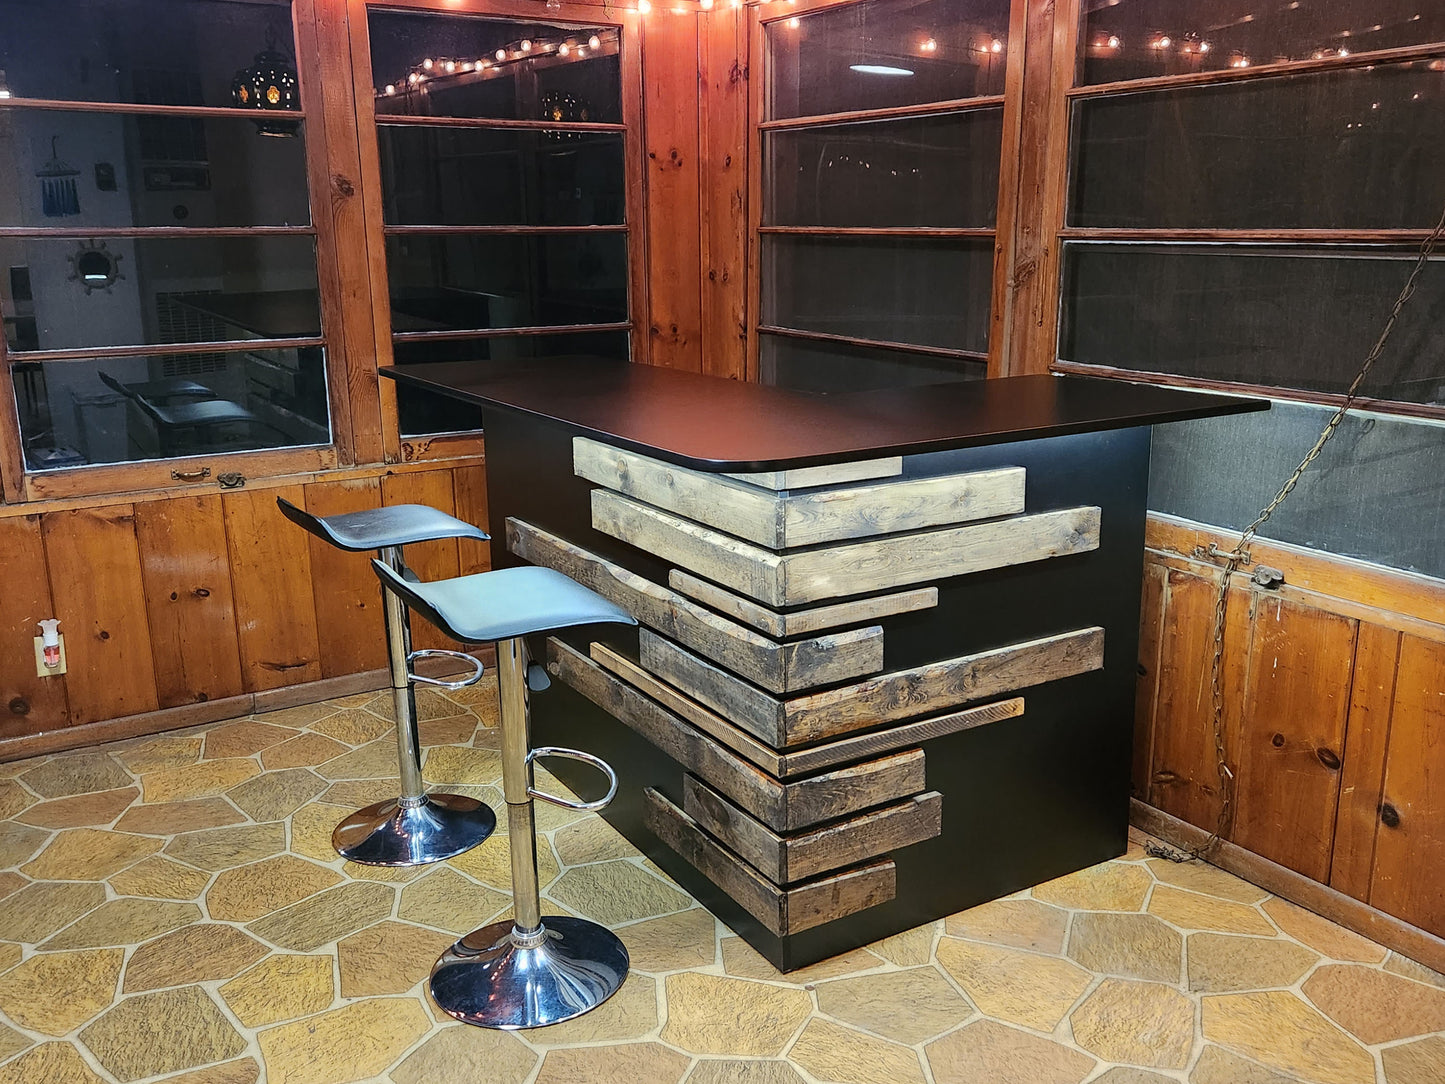 Rustic home bar crafted from reclaimed wood, featuring distressed finishes and ample storage shelves for bottles and glassware, creating a cozy and inviting atmosphere for entertaining guests